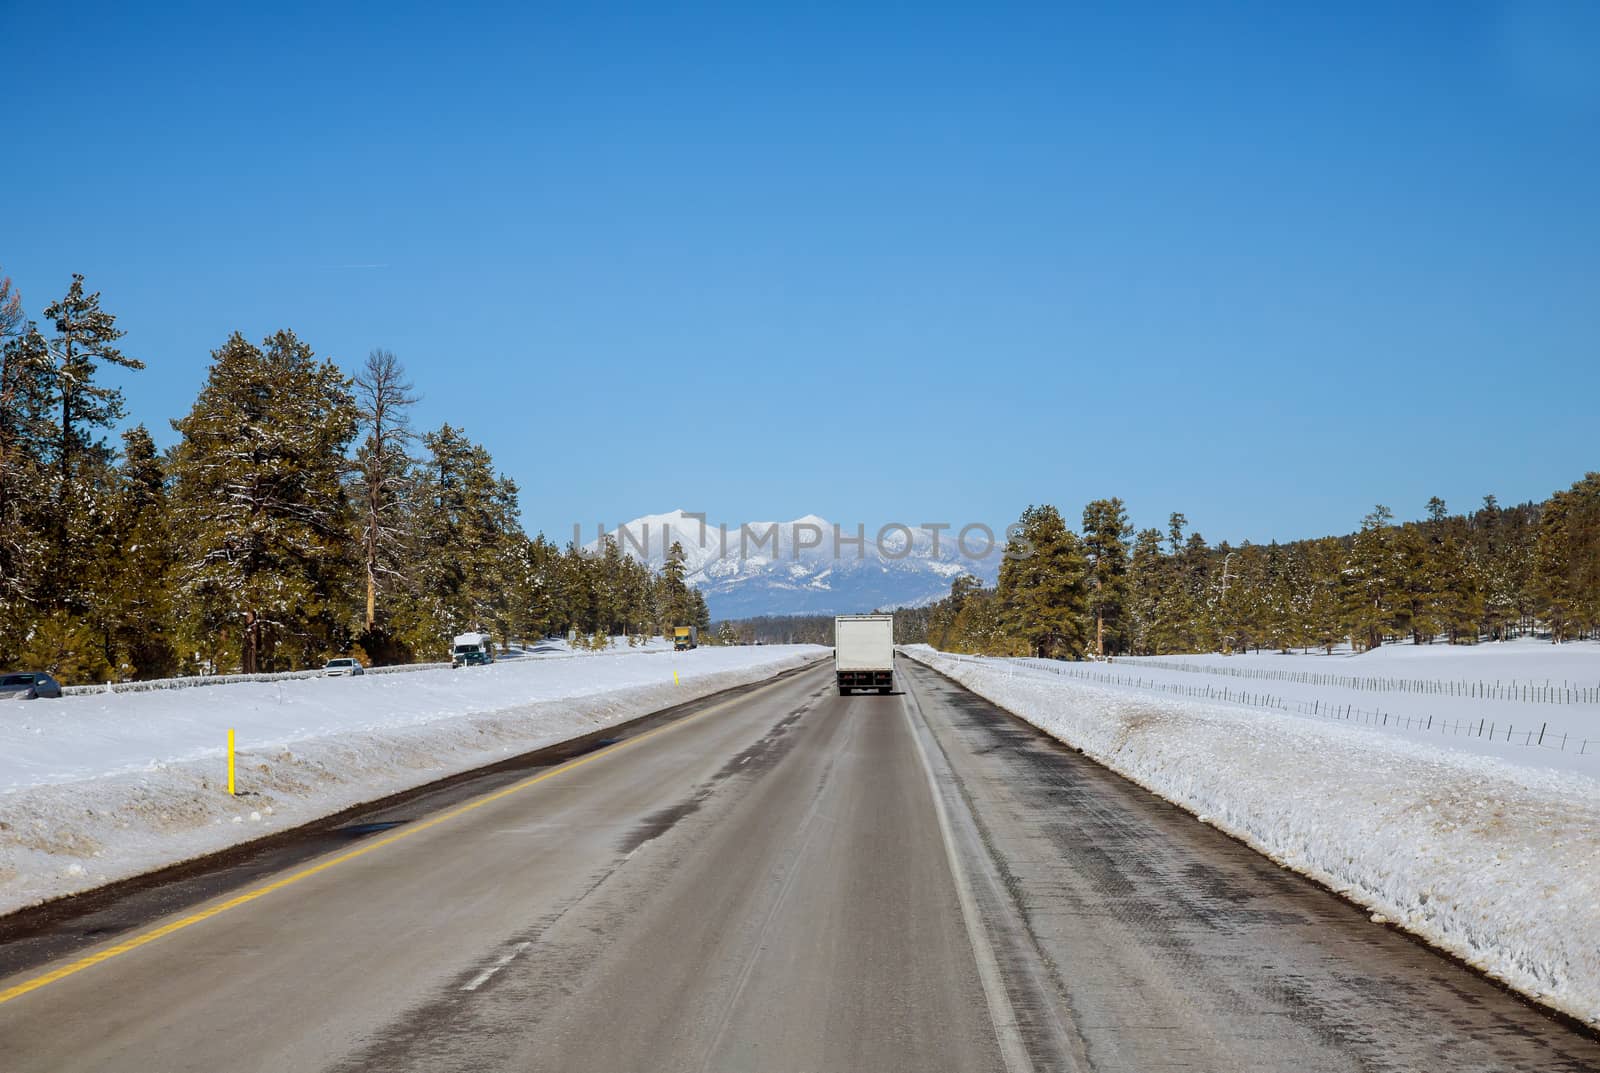 Panoramic view in a Colorado country, in winter on highway road with snow covered landscape